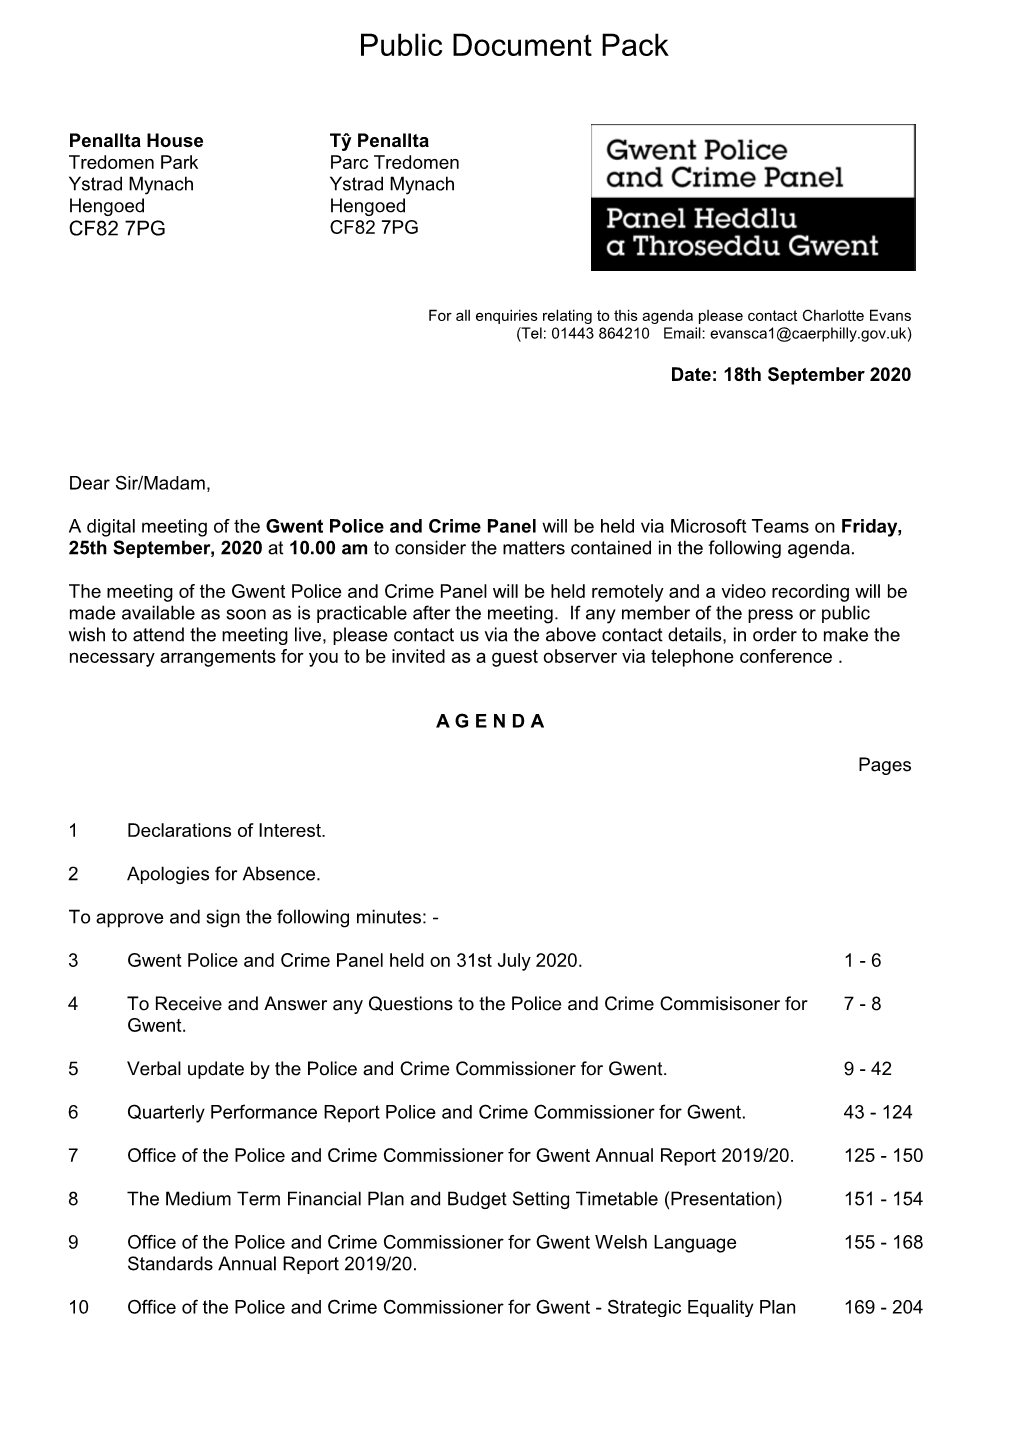 Agenda Document for Gwent Police and Crime Panel, 25/09/2020 10:00